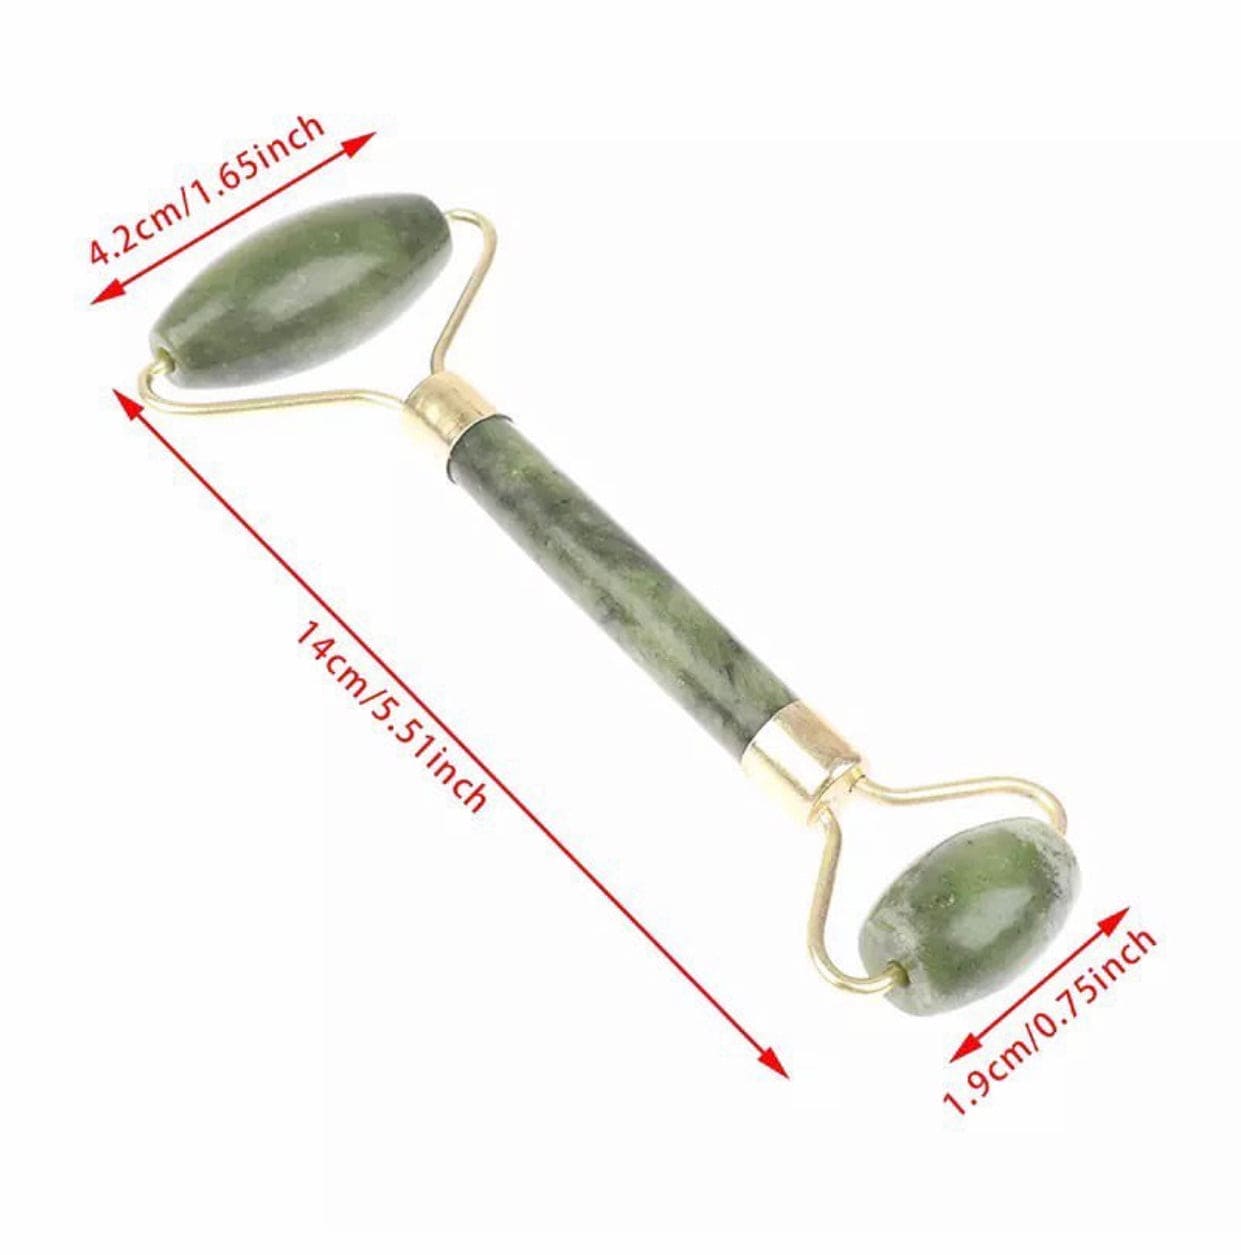 Jade Roller Massager With Face Lifting Guasha Stone, Jade Stone Facial Roller, Dual-Sided Face Massager, Muscle Relaxing Jade Roller